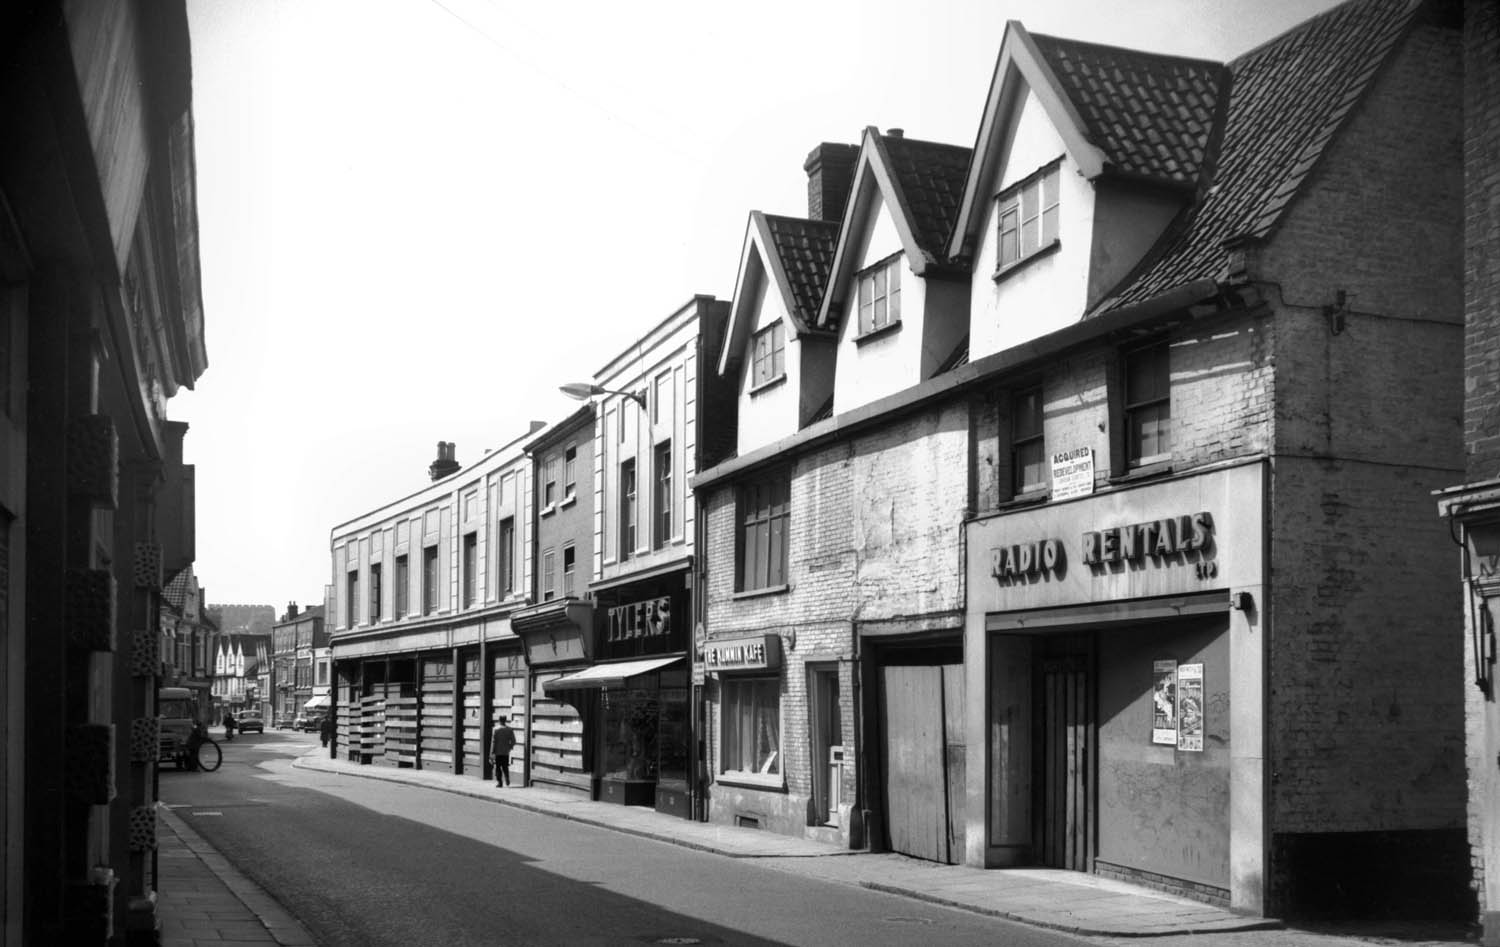 Magdalen St 72 to 82 [5044] 1966-05-15